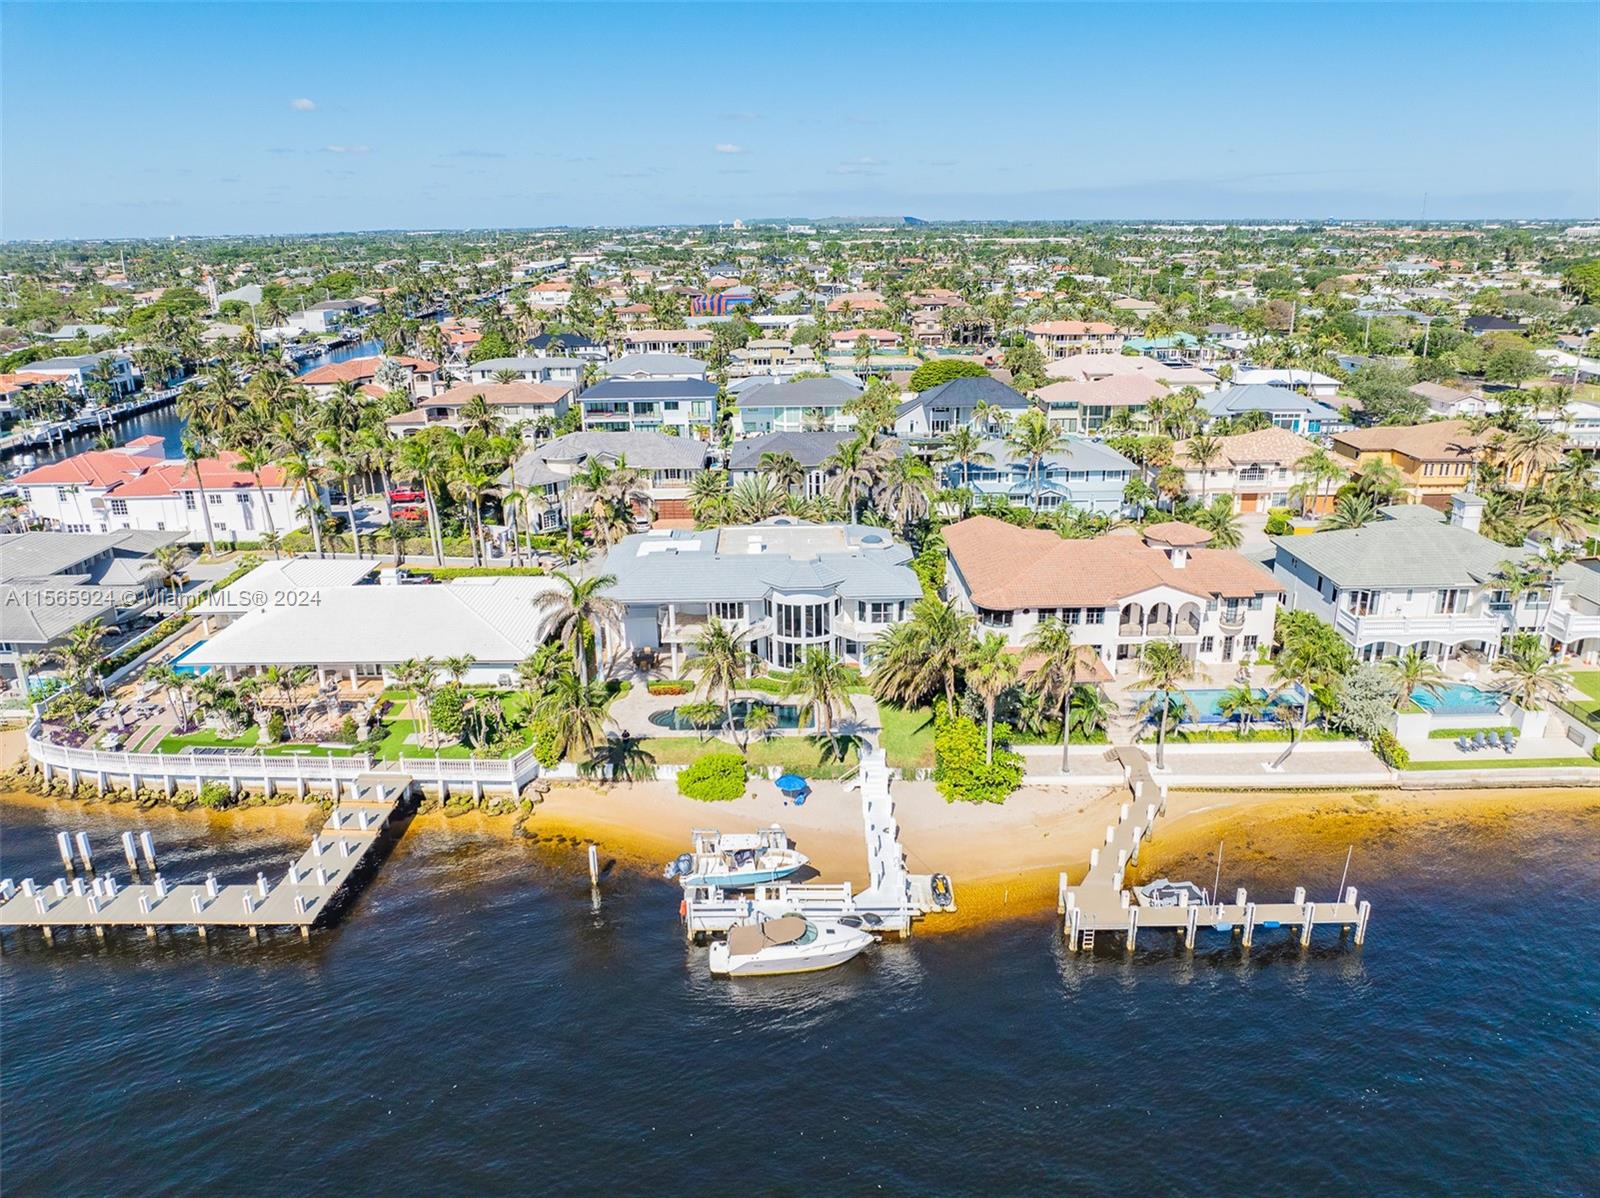 Welcome to waterfront luxury living in Lighthouse Point! This stunning estate offers an unparalleled oasis on a prime lot, boasting a private beach and 100 feet of direct intracoastal water frontage in a serene no wake zone near the inlet. Enjoy the ultimate in waterfront entertainment with an extended L-dock featuring a boat lift and jet ski dock, complemented by an oversized covered outdoor space. This elegant 5-bedroom, 6-bathroom home spans over 6,000 square feet of luxury living on a spacious 175-foot-deep lot. Grand foyer leading to floor-to-ceiling windows showcasing the stunning outdoor vistas. Large kitchen, wet bar, fireplace, home theater, and a separate guest apartment with its own entrance. Don't miss your chance to own a piece of waterfront paradise in Lighthouse Point.